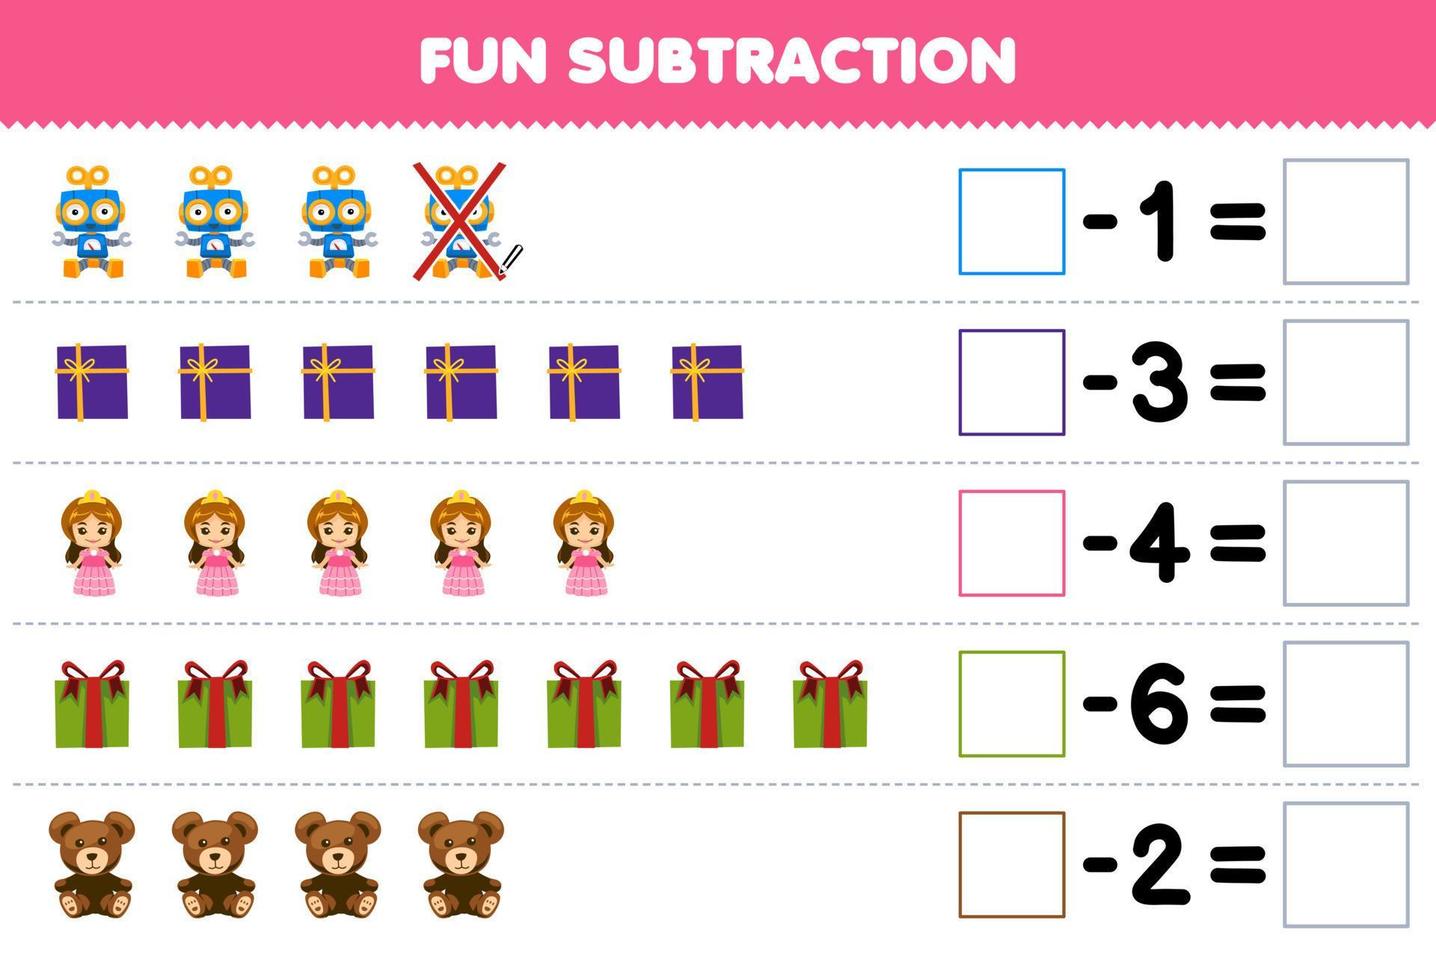 Education game for children fun subtraction by counting cute cartoon toy gift box each row and eliminating it printable winter worksheet vector